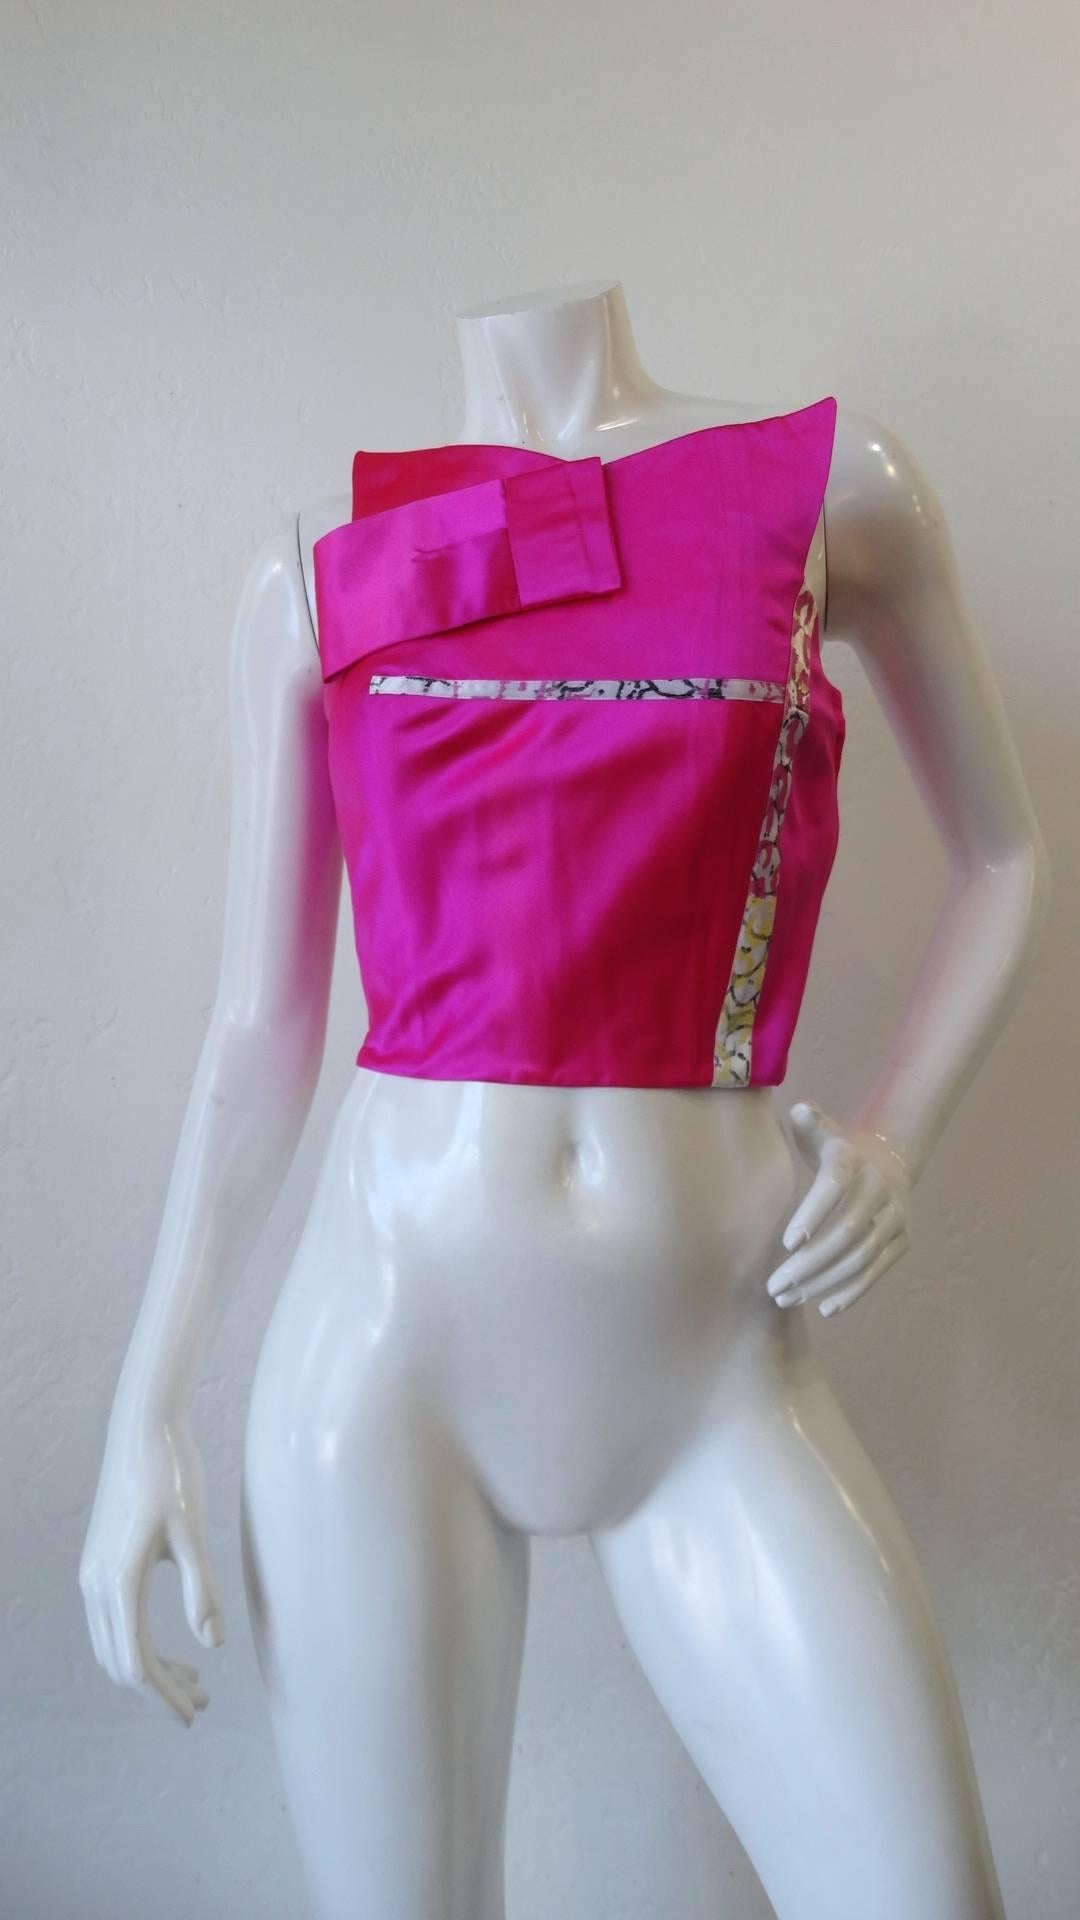 The most incredible 1990s bustier top from iconic designer Christian La Croix! Unique origami inspired silhouette with high neckline and sleeveless fit. Made of a bold hot pink silk fabric with hints of printed trim up the bodice. Zips up the side.